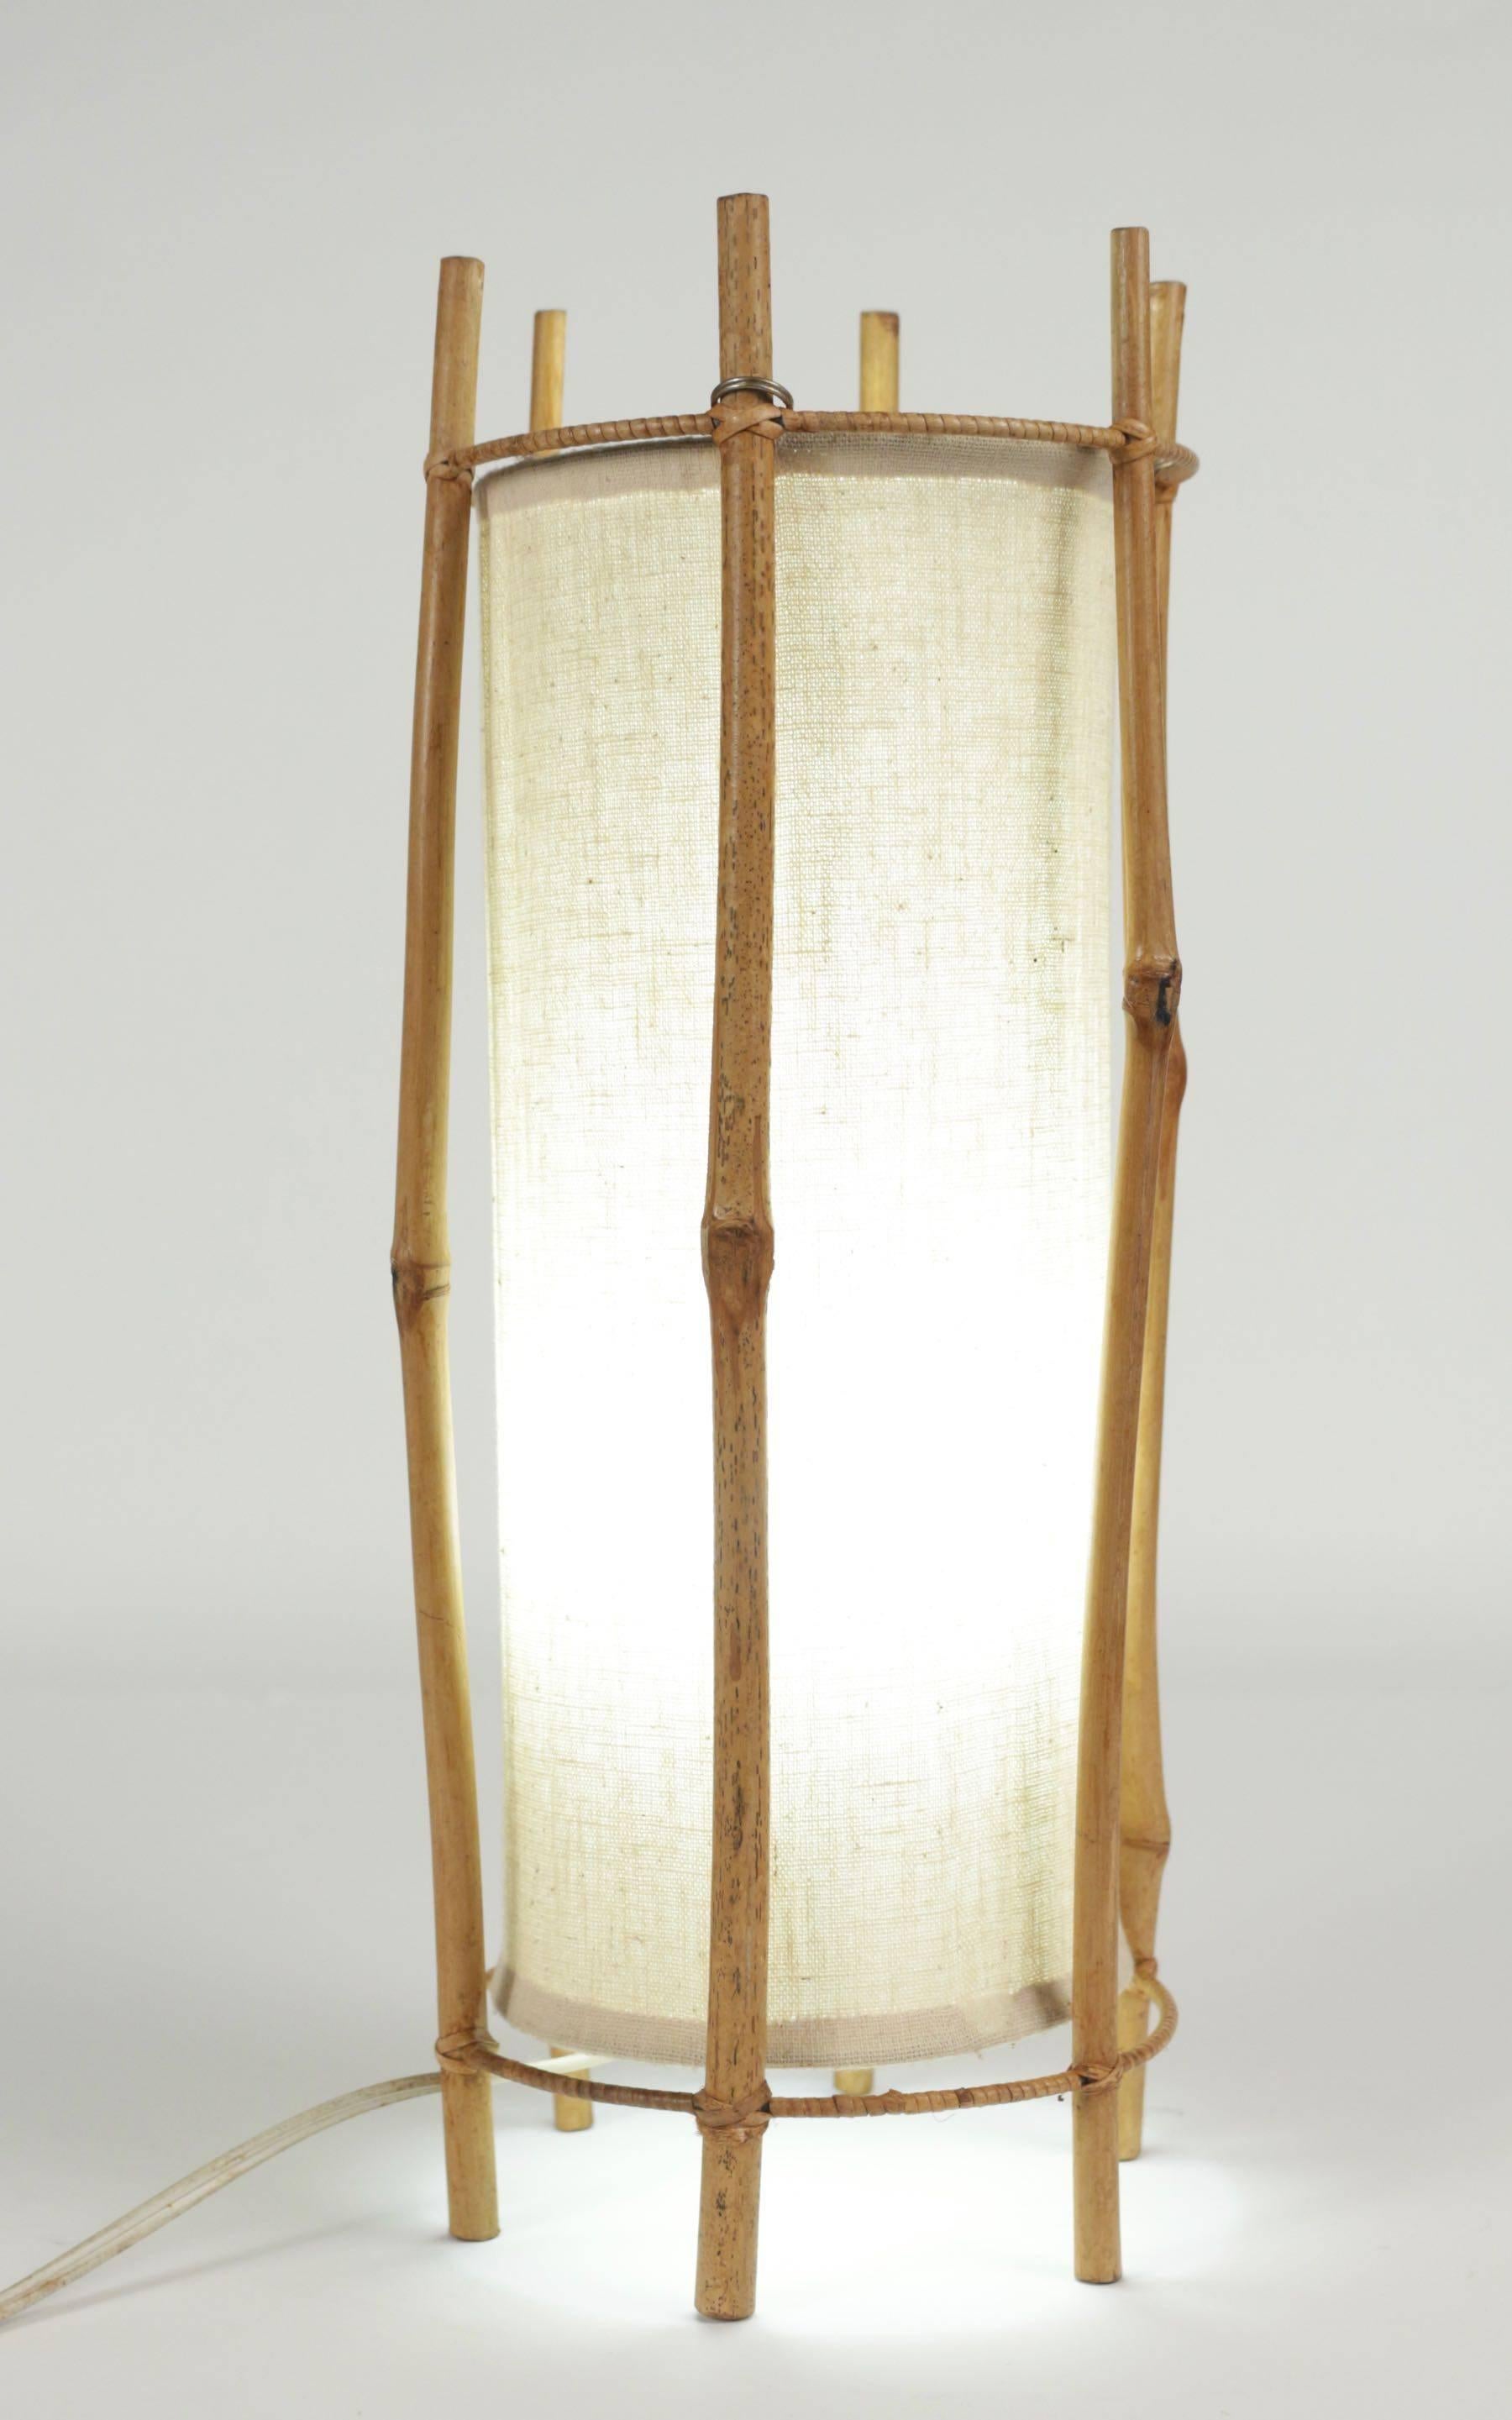 1950 pair of table lamps Louis Sognot.

Each lamp consists in six bamboo stems. Cylindrical shaped lamp shade made of white cotton.

One bulb per lamp.
               